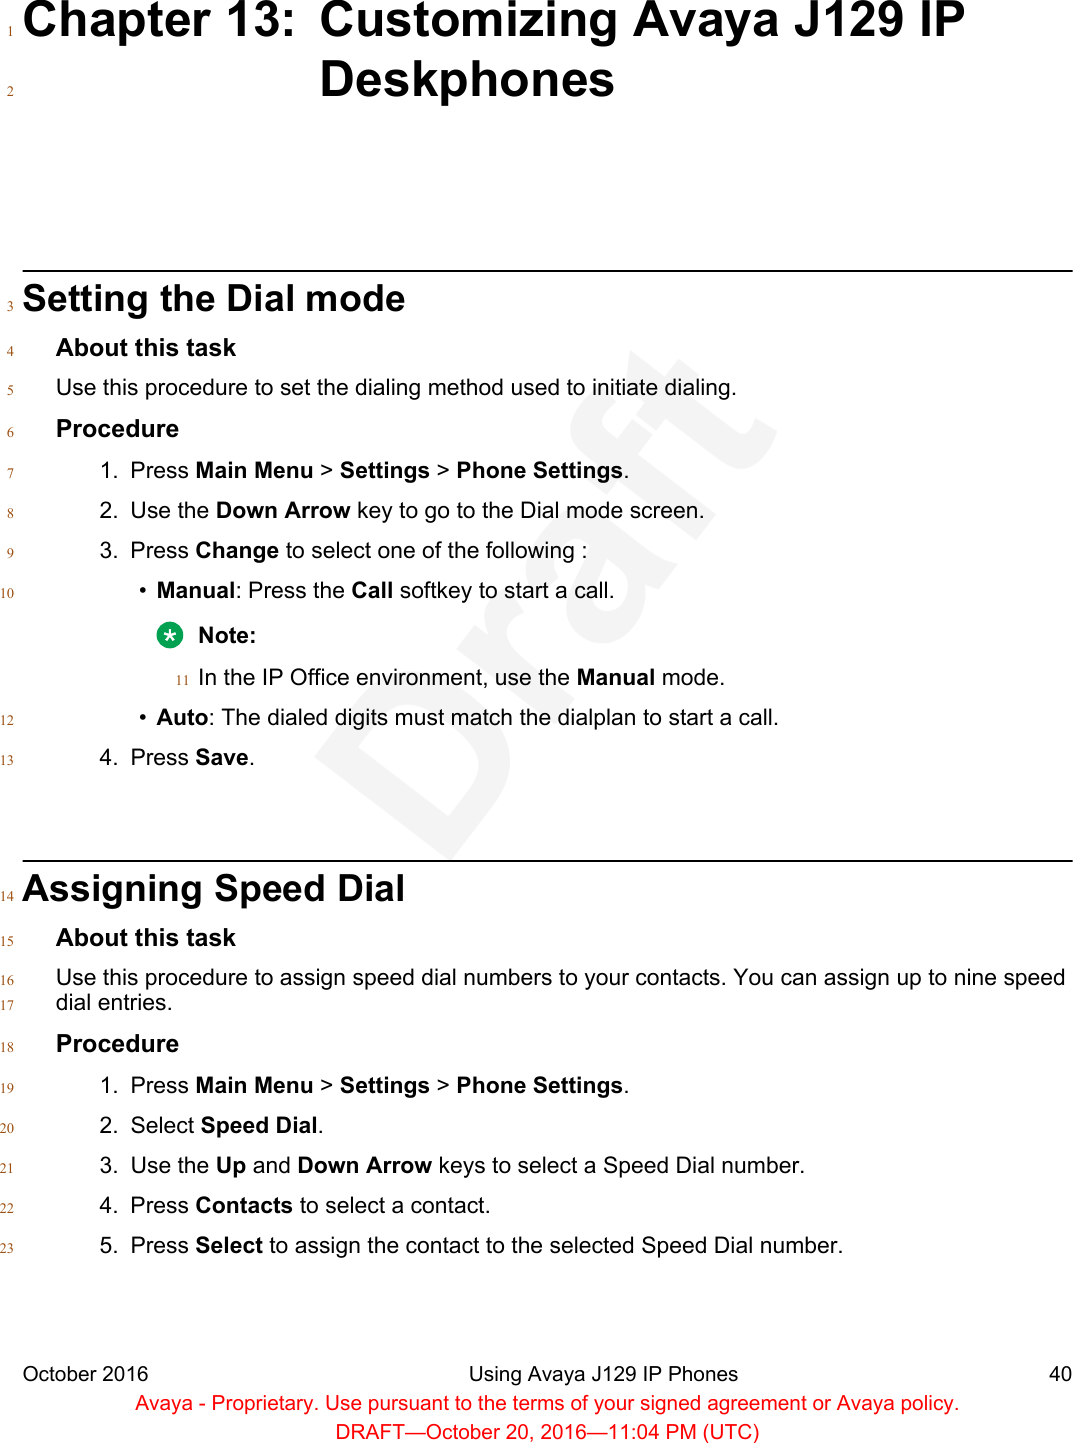 Chapter 13: Customizing Avaya J129 IP1Deskphones2Setting the Dial mode3About this task4Use this procedure to set the dialing method used to initiate dialing.5Procedure61. Press Main Menu &gt; Settings &gt; Phone Settings.72. Use the Down Arrow key to go to the Dial mode screen.83. Press Change to select one of the following :9•Manual: Press the Call softkey to start a call.10Note:In the IP Office environment, use the Manual mode.11•Auto: The dialed digits must match the dialplan to start a call.124. Press Save.13Assigning Speed Dial14About this task15Use this procedure to assign speed dial numbers to your contacts. You can assign up to nine speed16dial entries.17Procedure181. Press Main Menu &gt; Settings &gt; Phone Settings.192. Select Speed Dial.203. Use the Up and Down Arrow keys to select a Speed Dial number.214. Press Contacts to select a contact.225. Press Select to assign the contact to the selected Speed Dial number.23October 2016 Using Avaya J129 IP Phones 40Avaya - Proprietary. Use pursuant to the terms of your signed agreement or Avaya policy.DRAFT—October 20, 2016—11:04 PM (UTC)